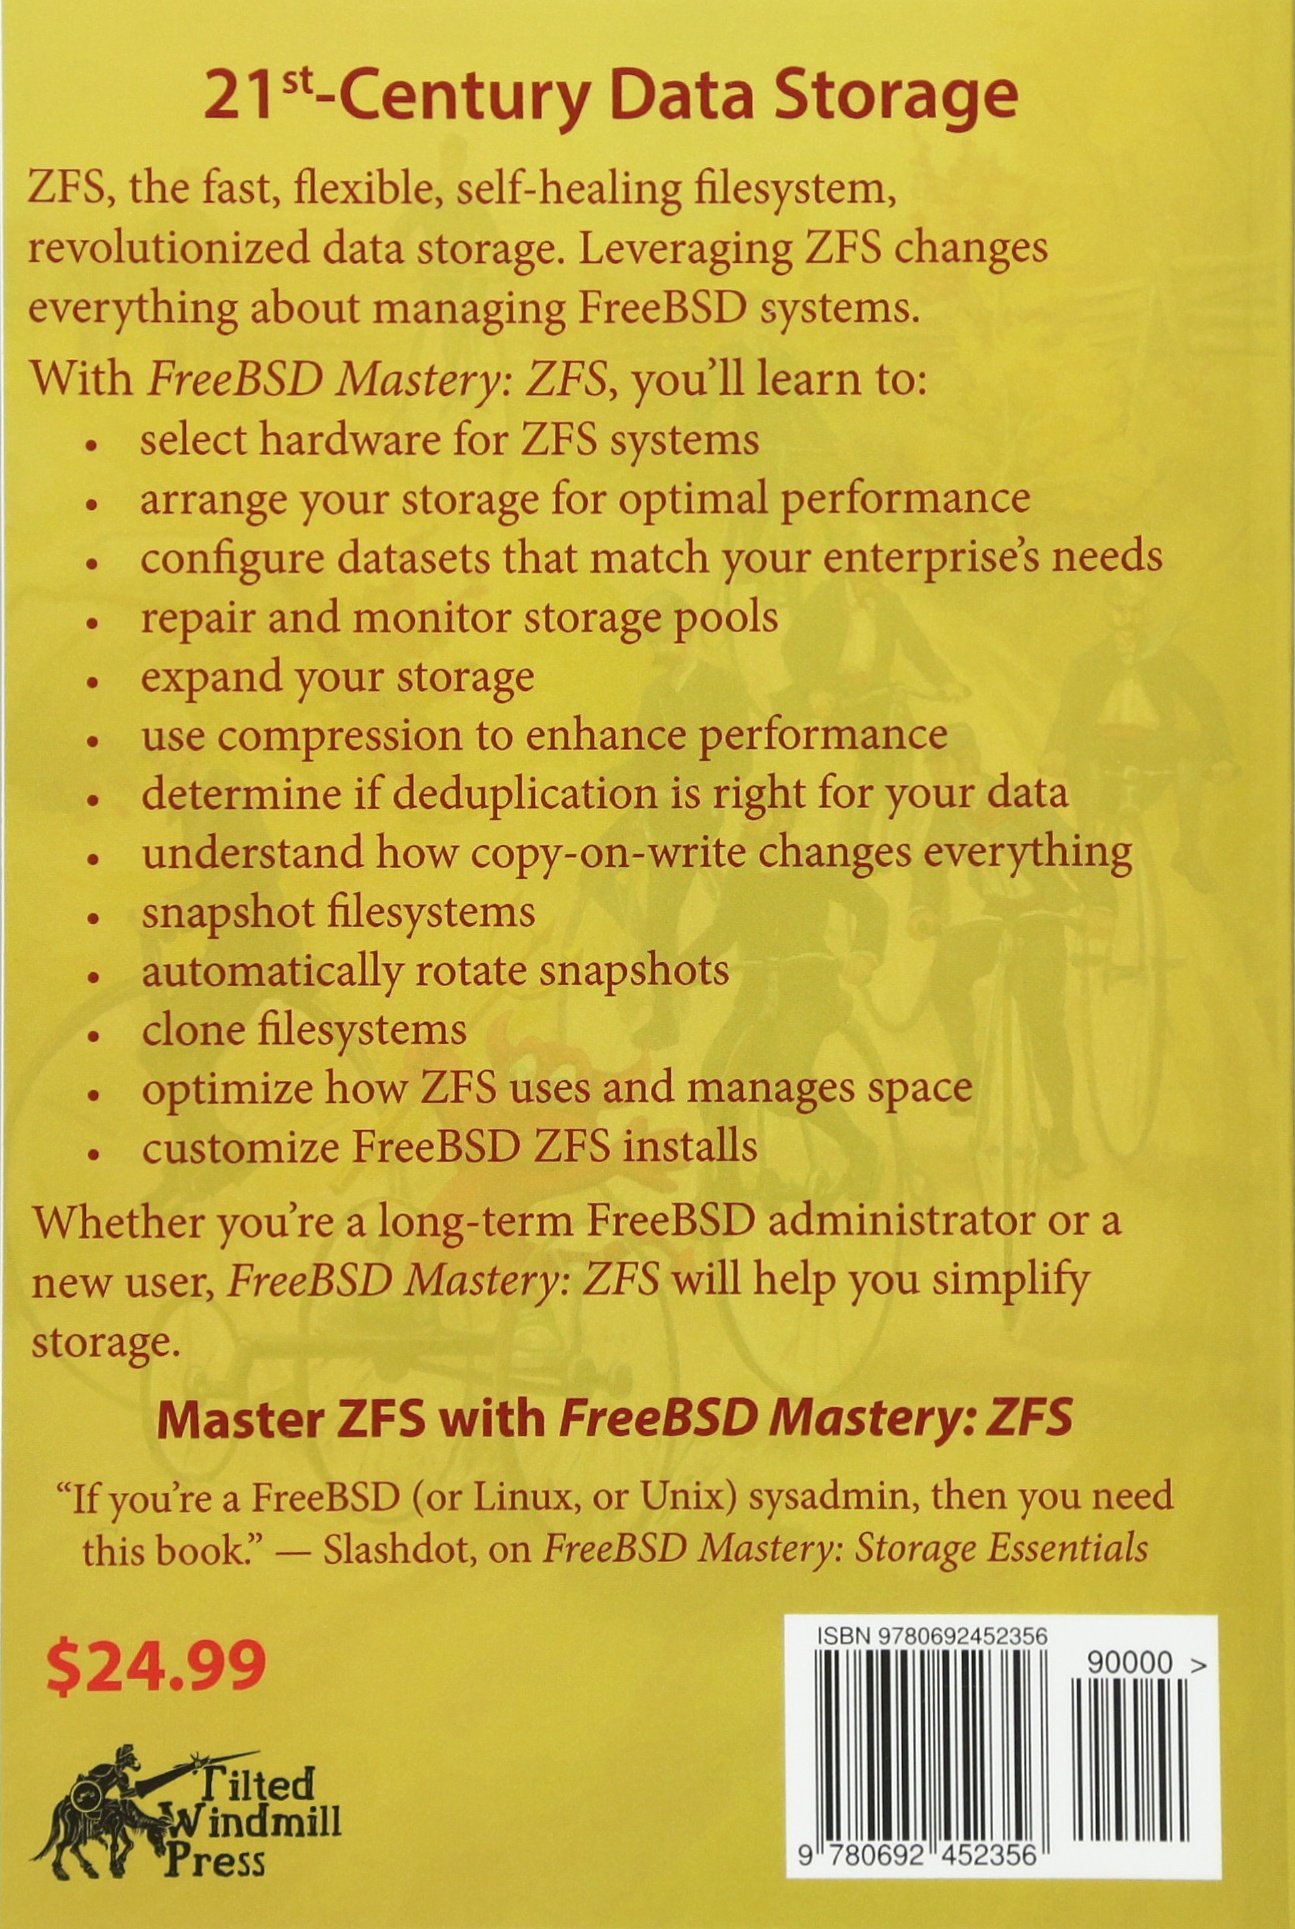 Freebsd mastery: advanced zfs